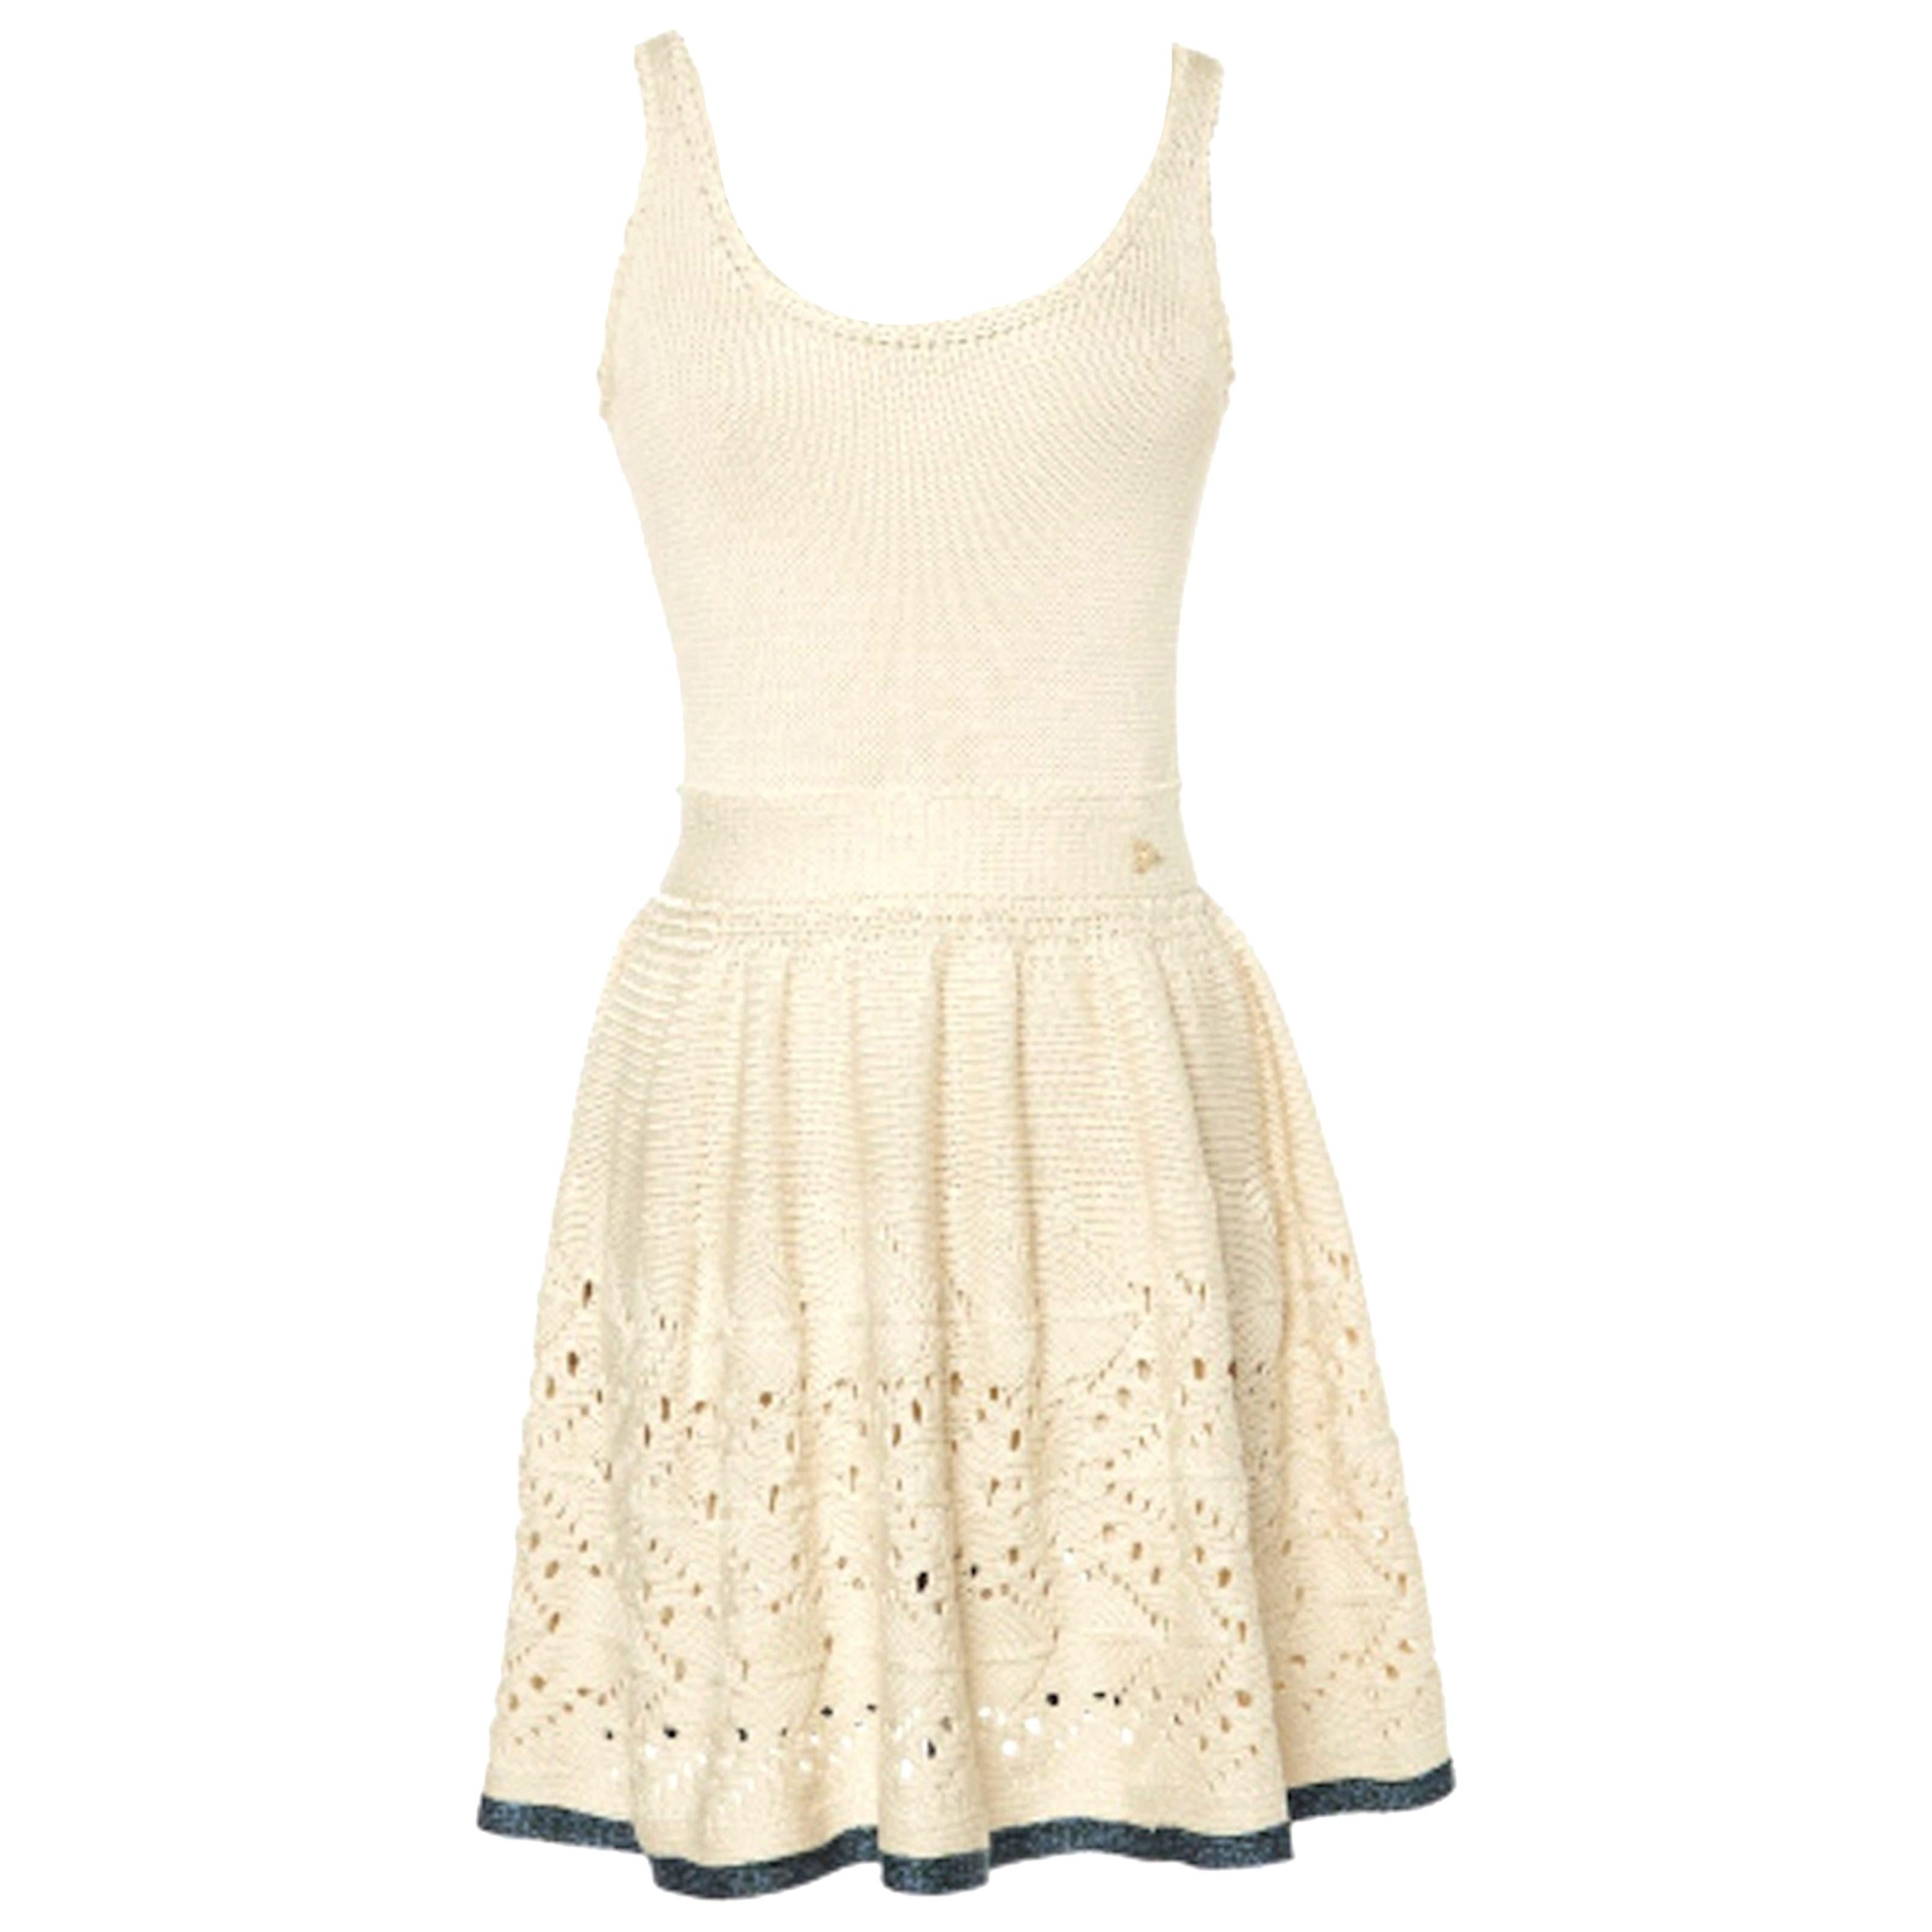 Ivory Chanel Crochet Knit Dress with Seafoam Trimming 38